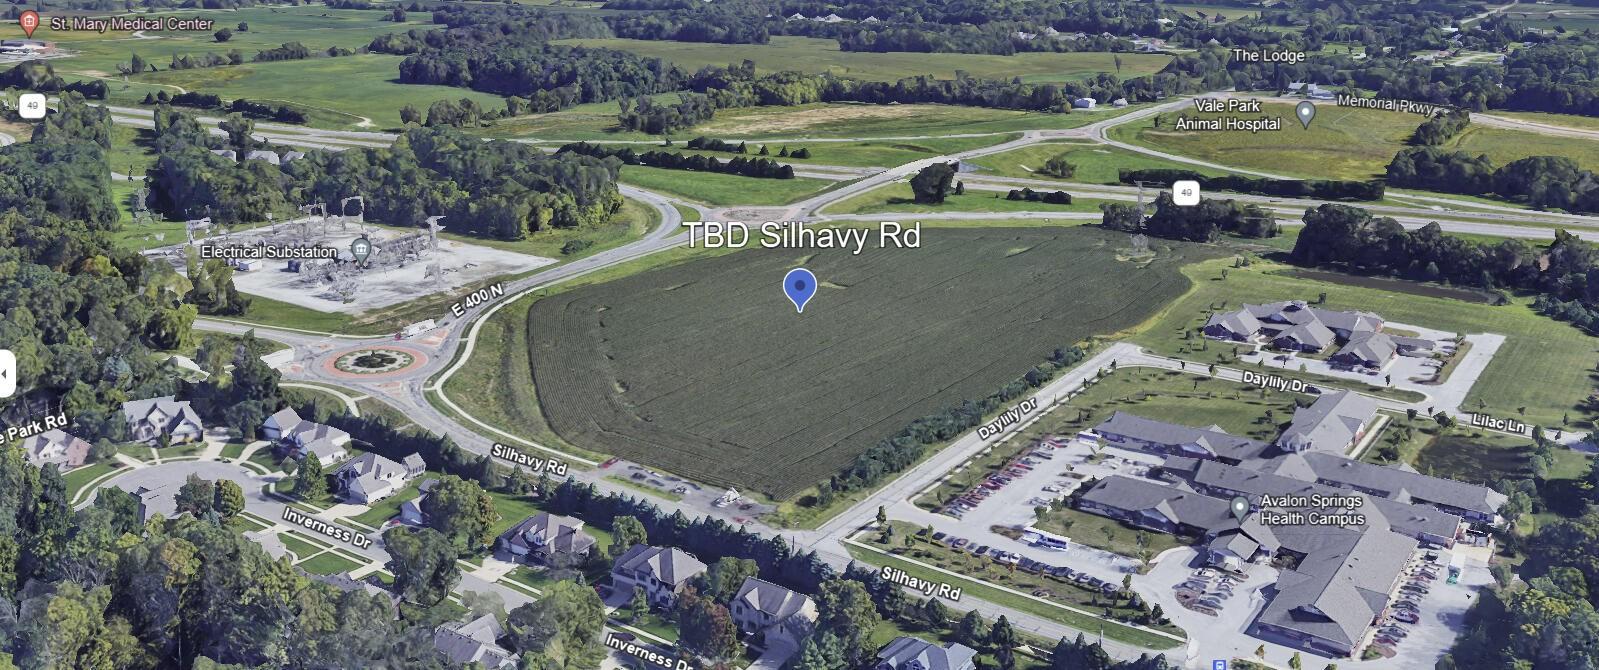 Property Image for Tbd Silhavy Road